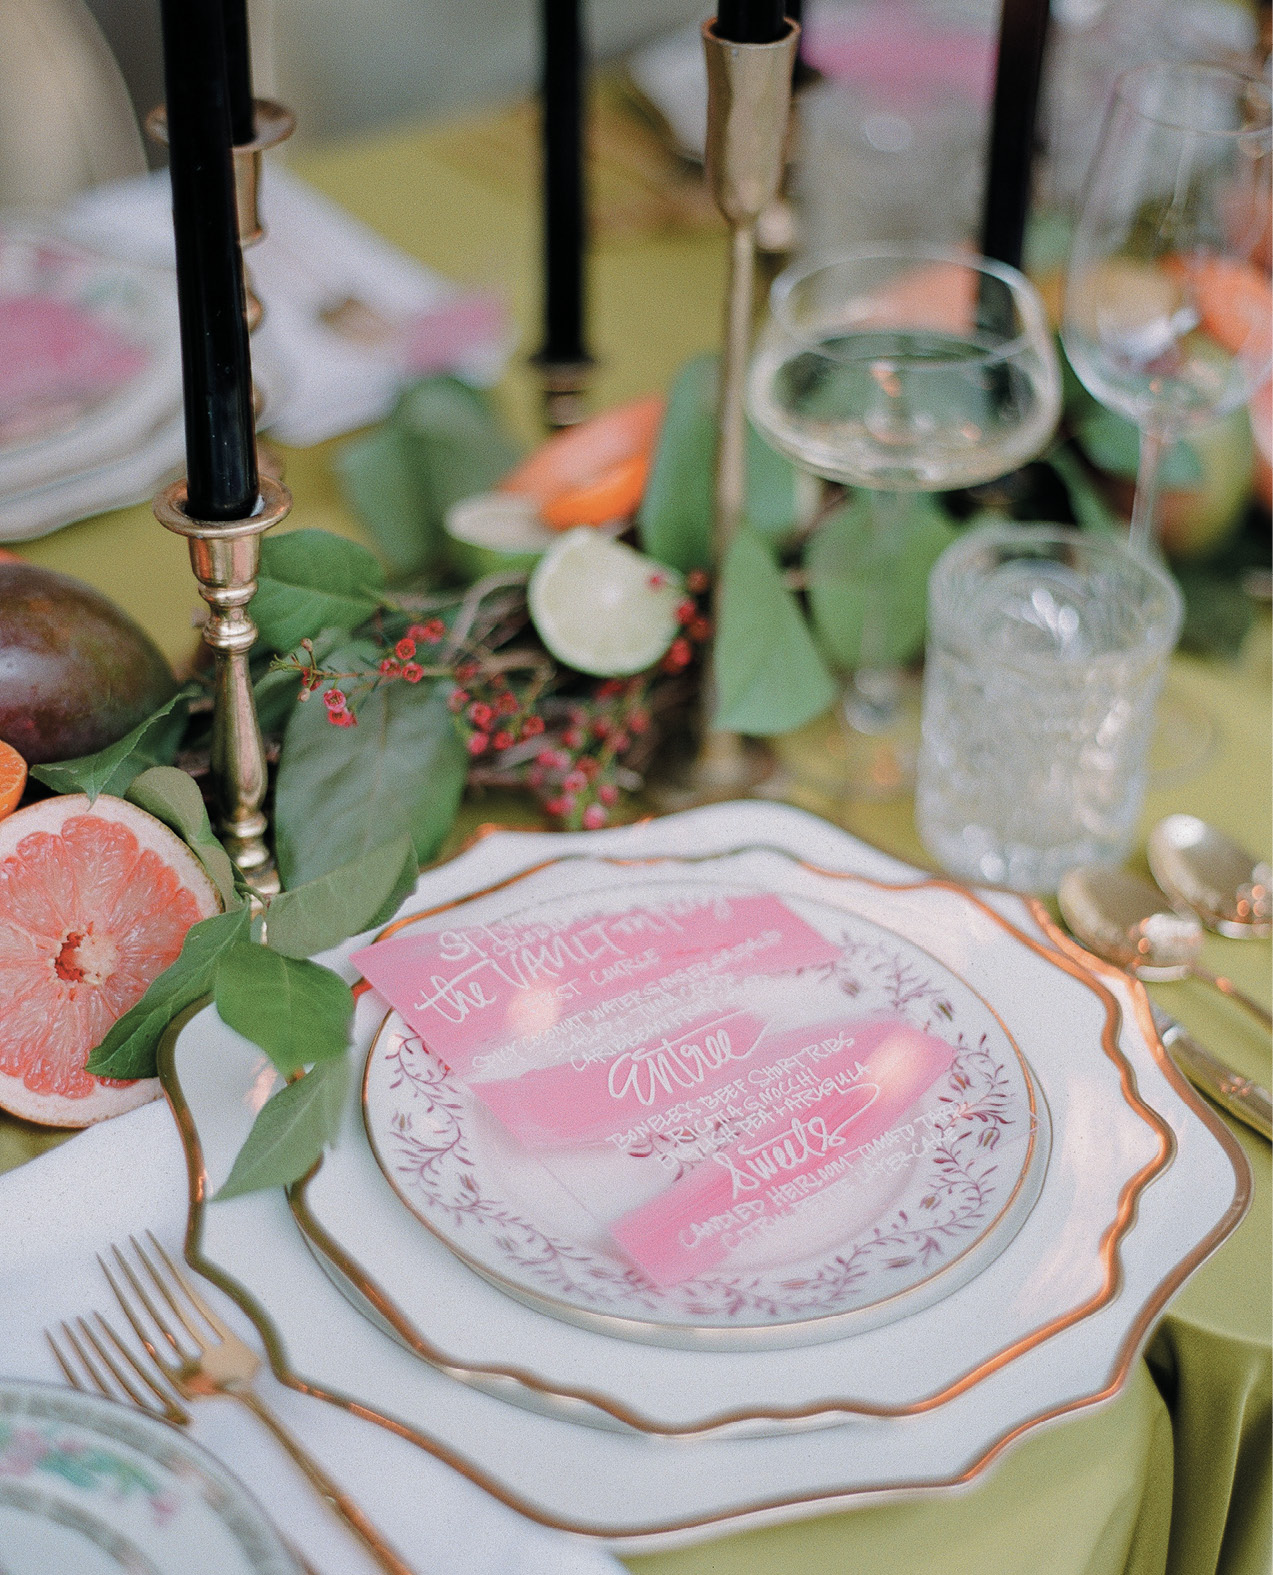 Each place setting of classic white and gold china chargers and dinner plates was topped with a uniquely patterned salad plate, as well as hand-painted acrylic menu cards by Mary Ruth Miller.